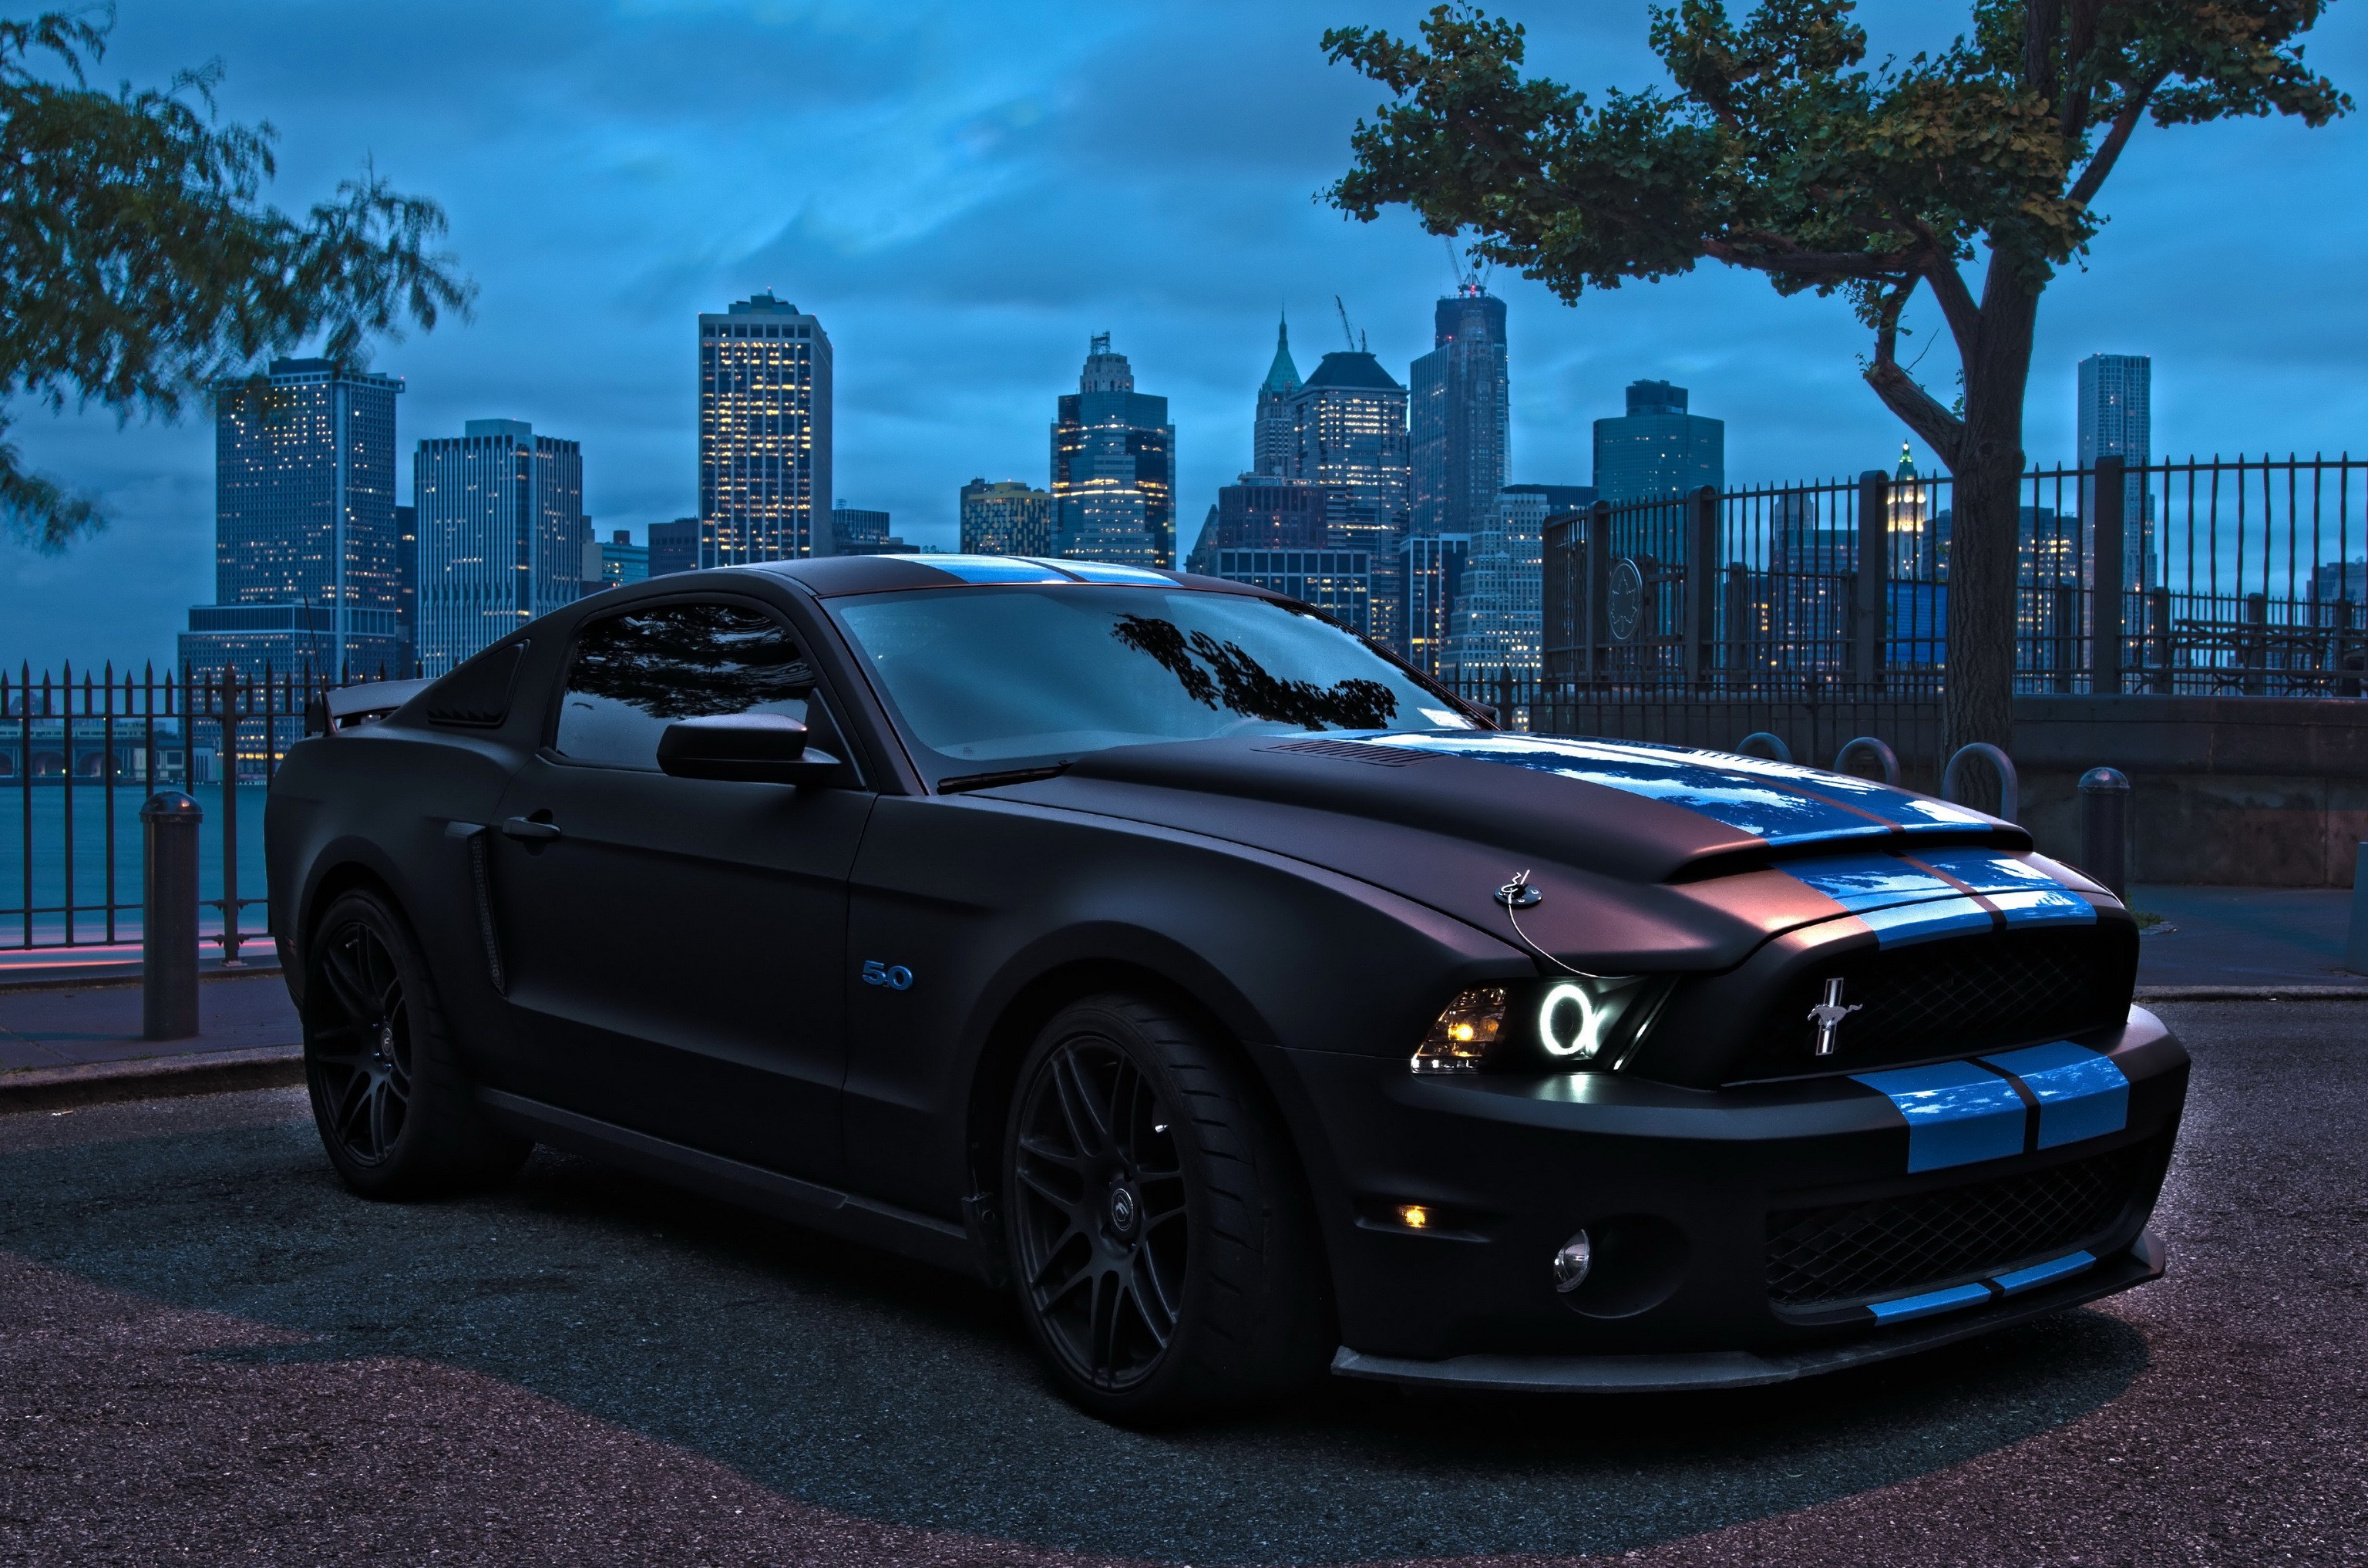 Ford Mustang, Cityscape Wallpaper